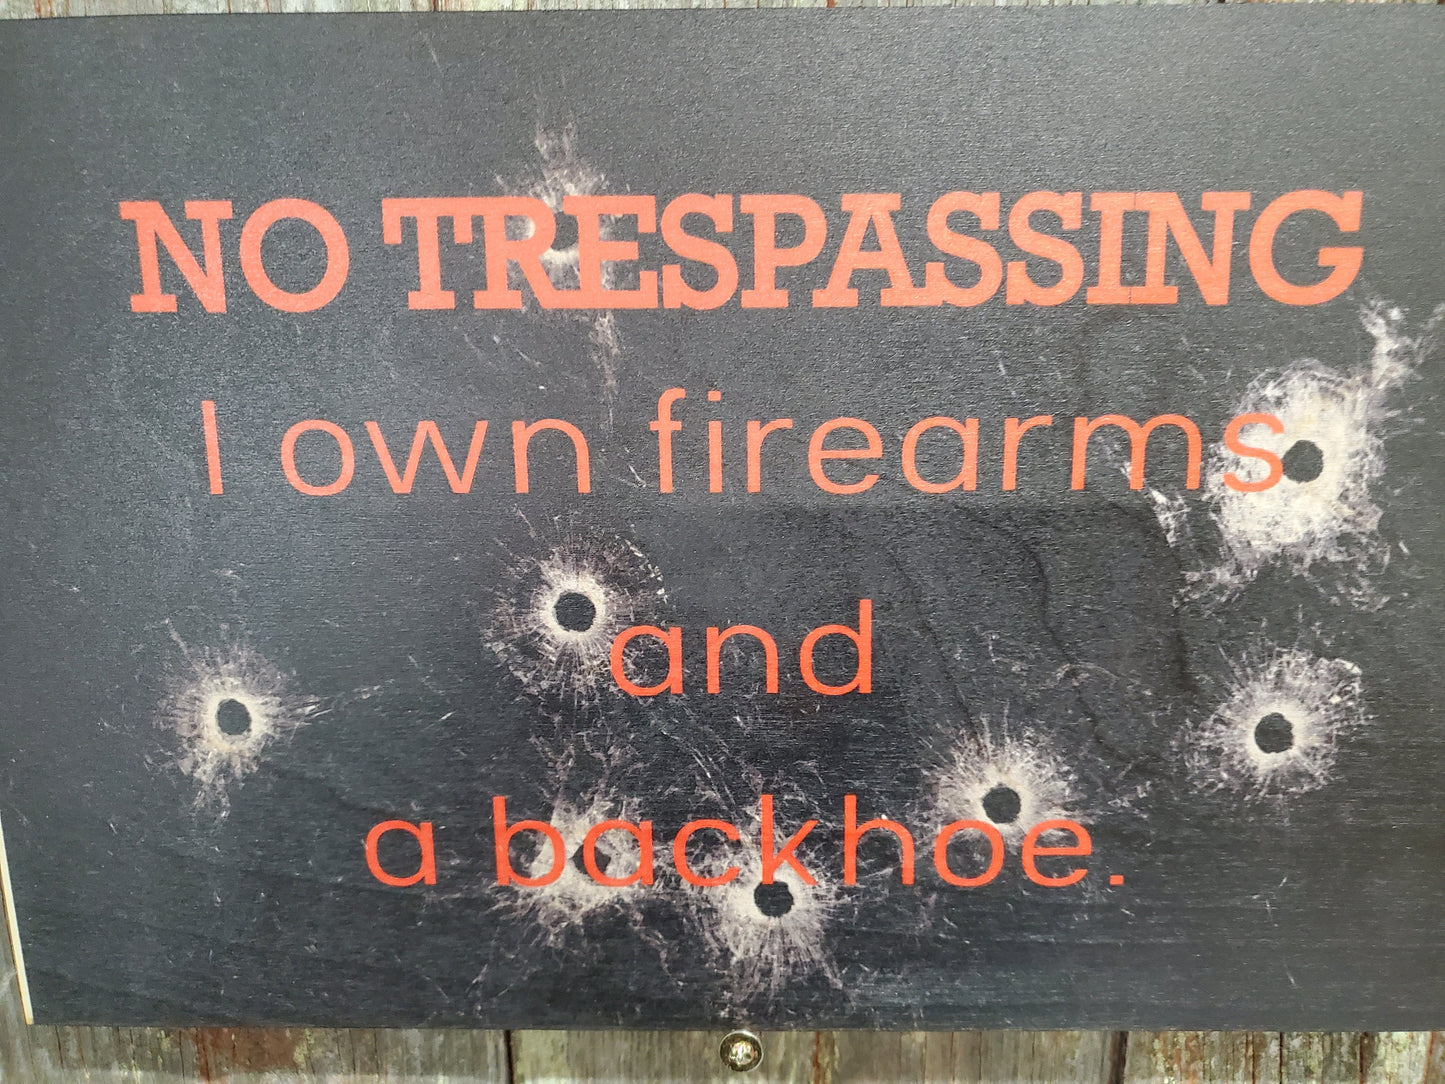 Gun Owner No Trespassing Sign I Own Firearms and a Backhoe Stay Out  Wooden Front Door Entry Way Decor Plaque Wood Print